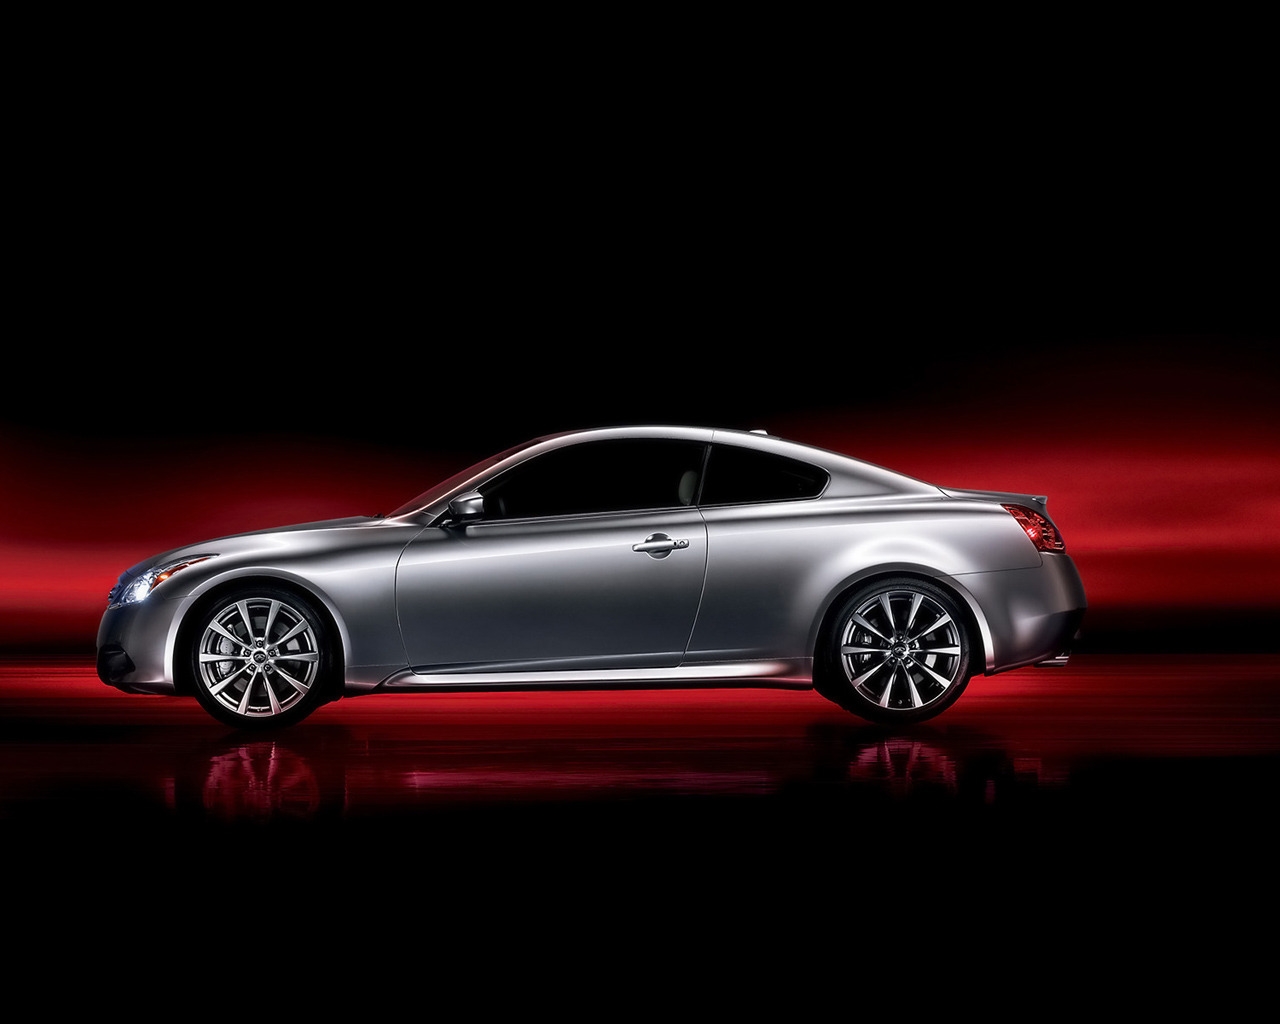 Grey Infiniti G37 Coupe for 1280 x 1024 resolution